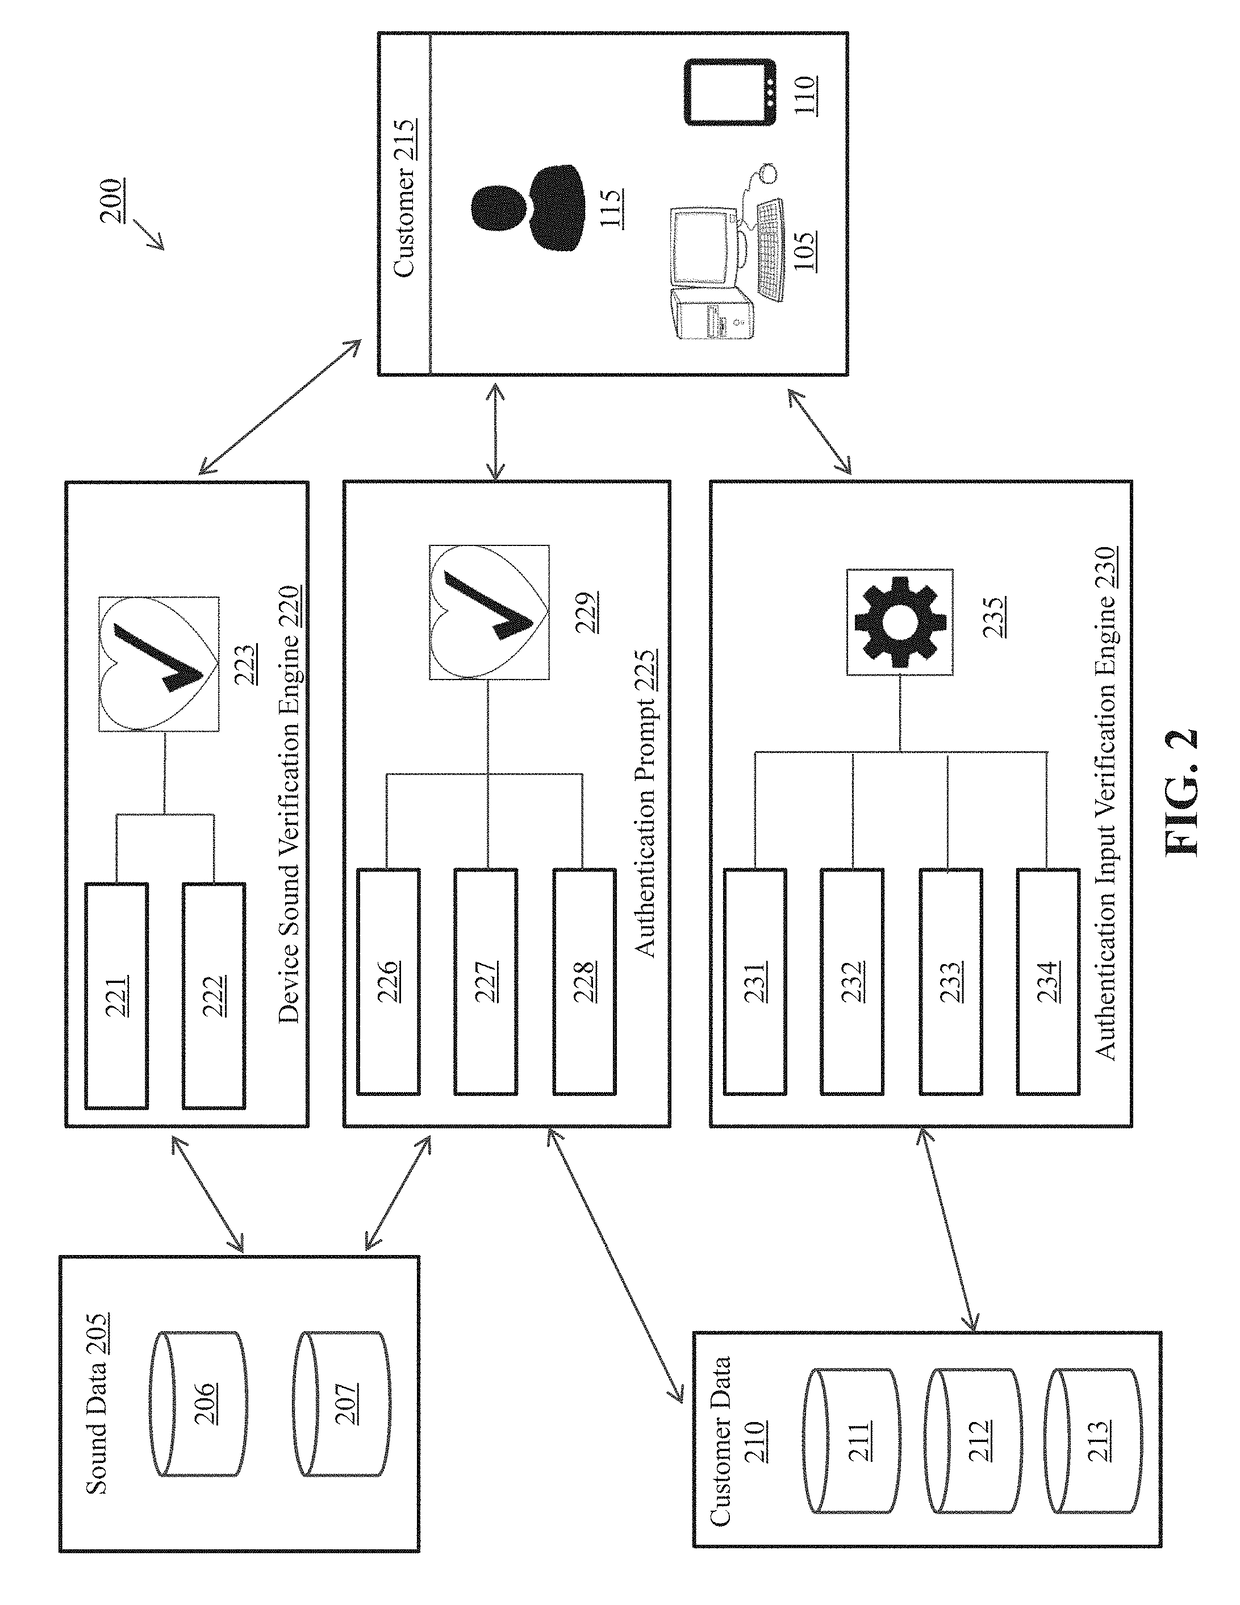 Systems and methods for simultaneous voice and sound multifactor authentication